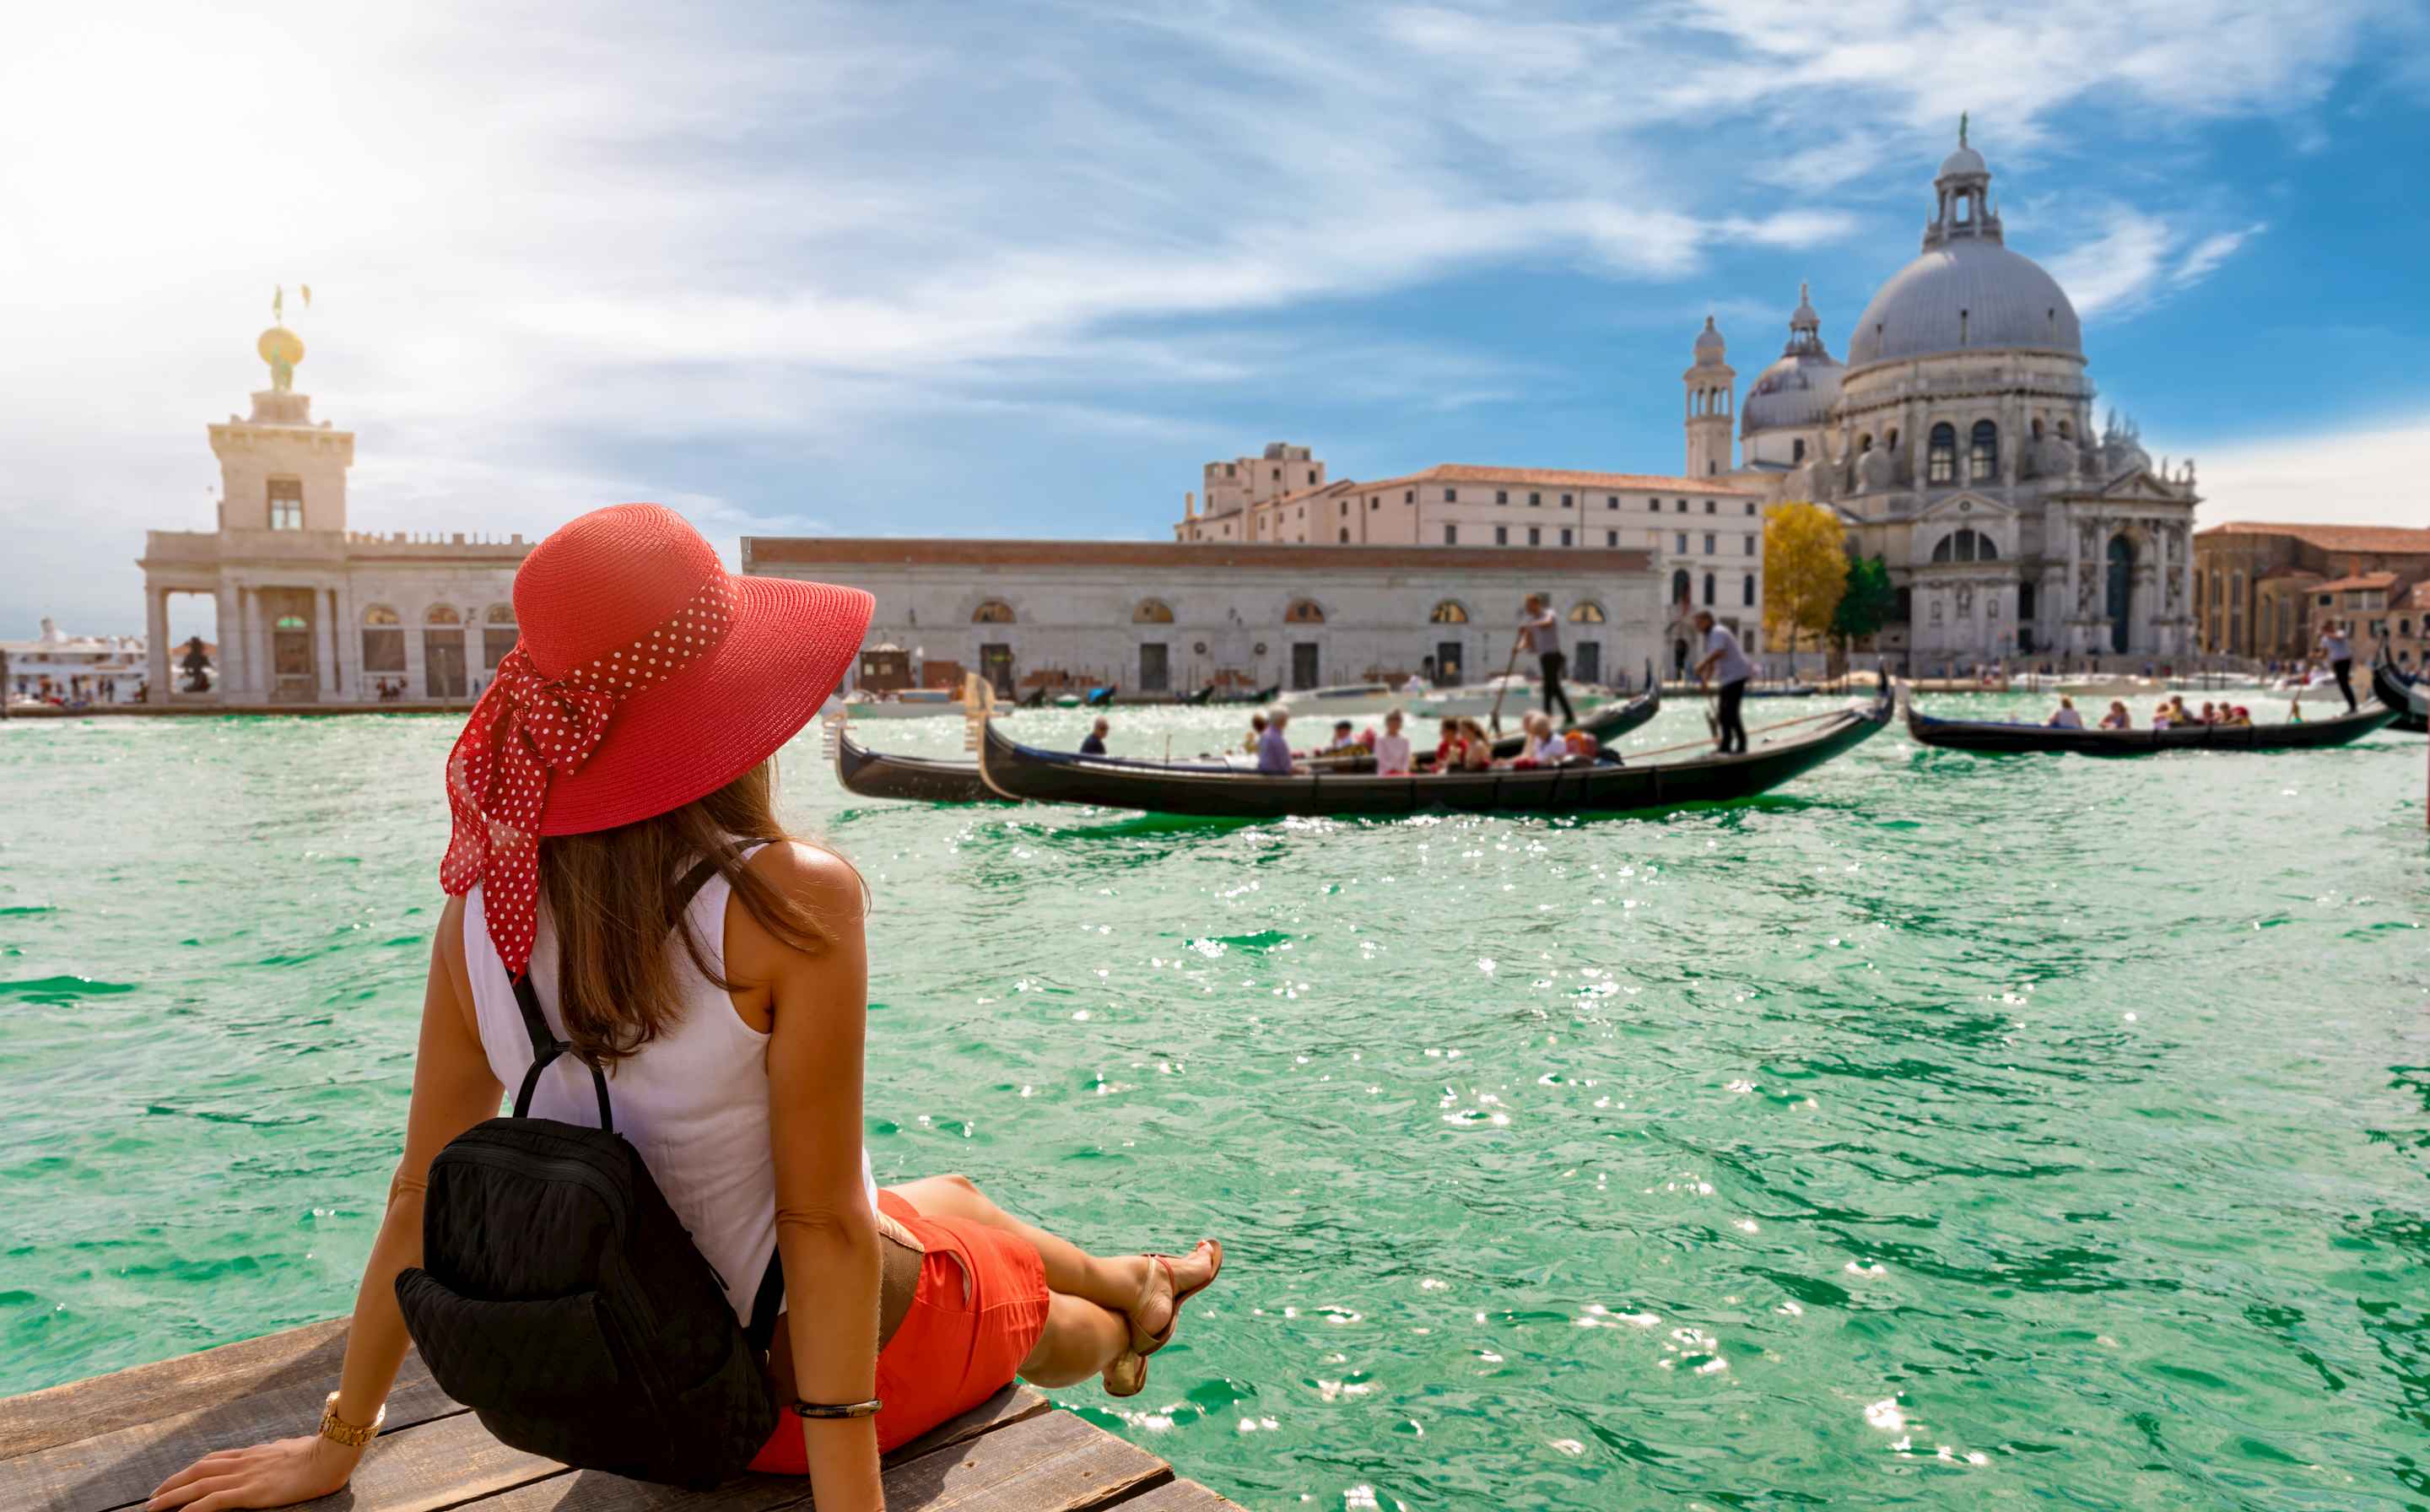 A woman looking across the canal in Venice at Santa Maria della Salute